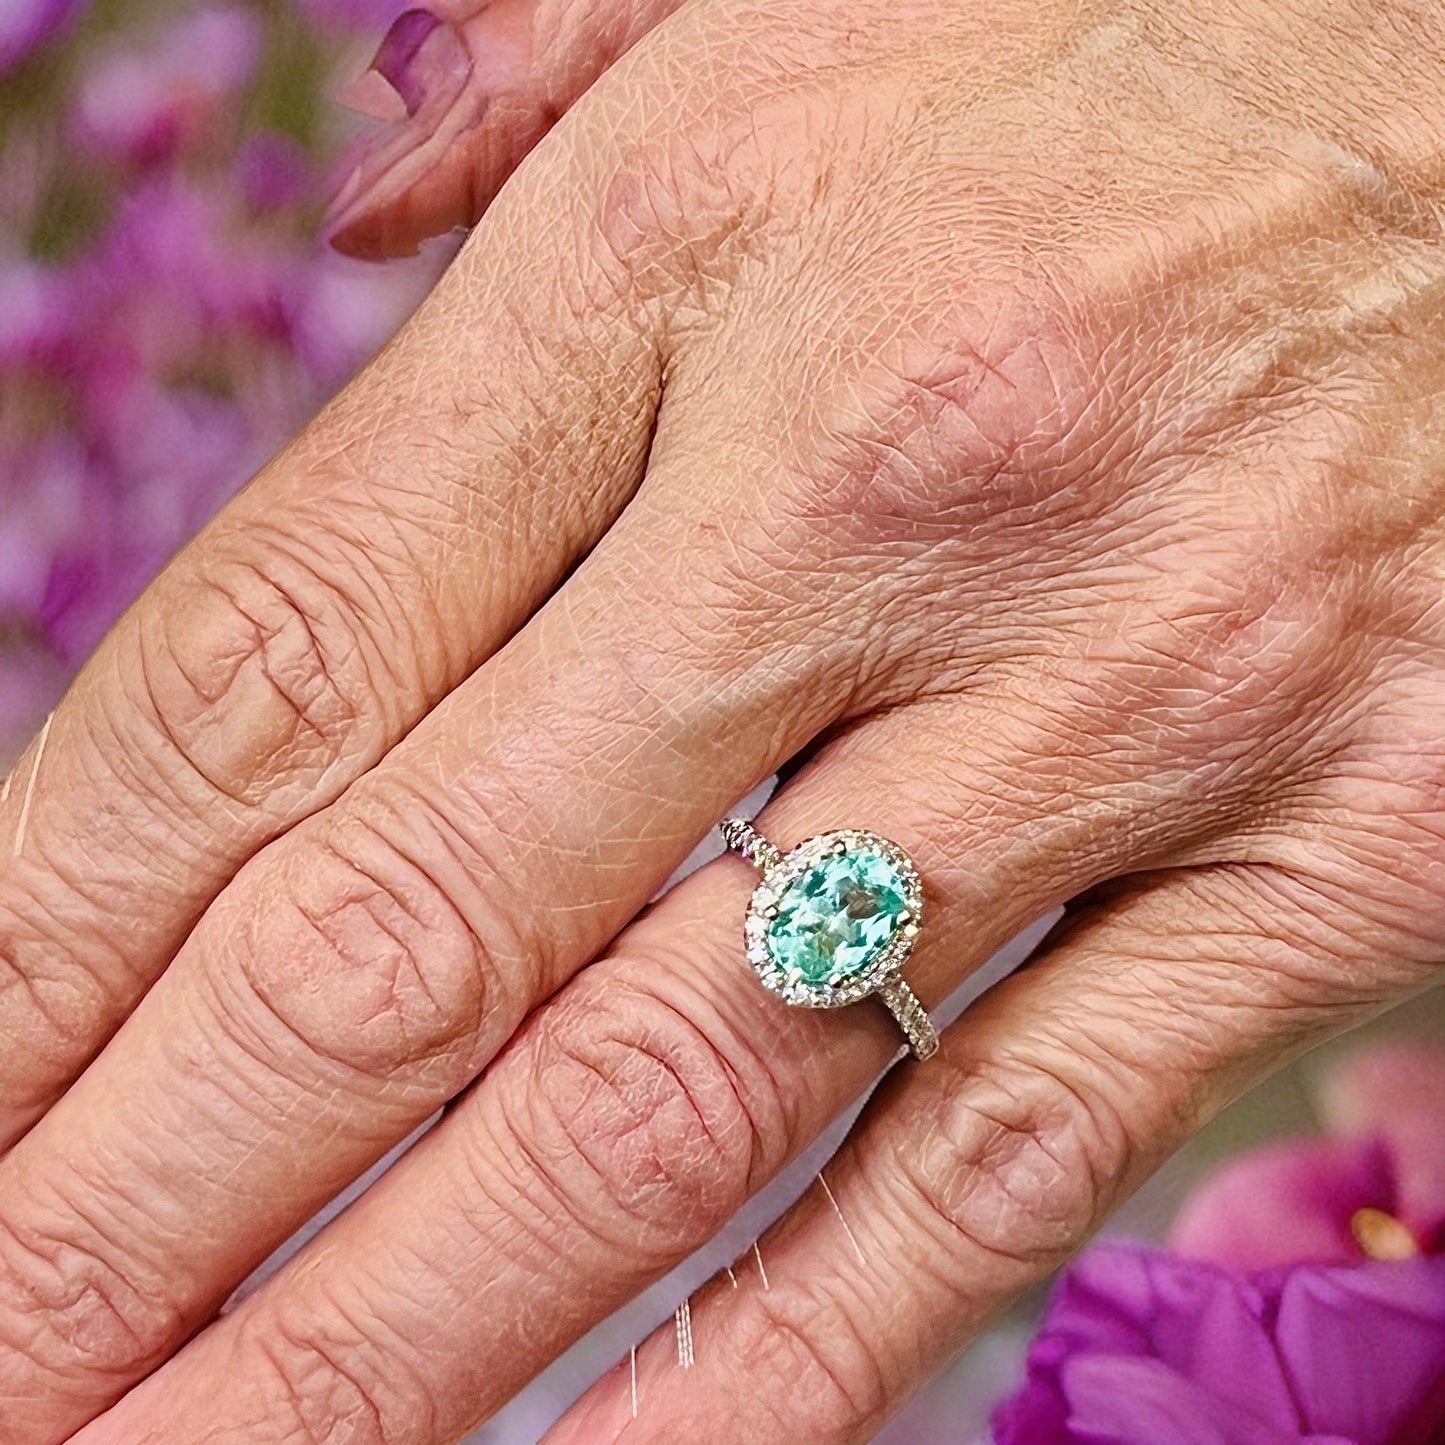 Natural Colombian Emerald Diamond Ring Size 6.5 14k W Gold 2.98 TCW Certified $6,790 218110 - Certified Fine Jewelry